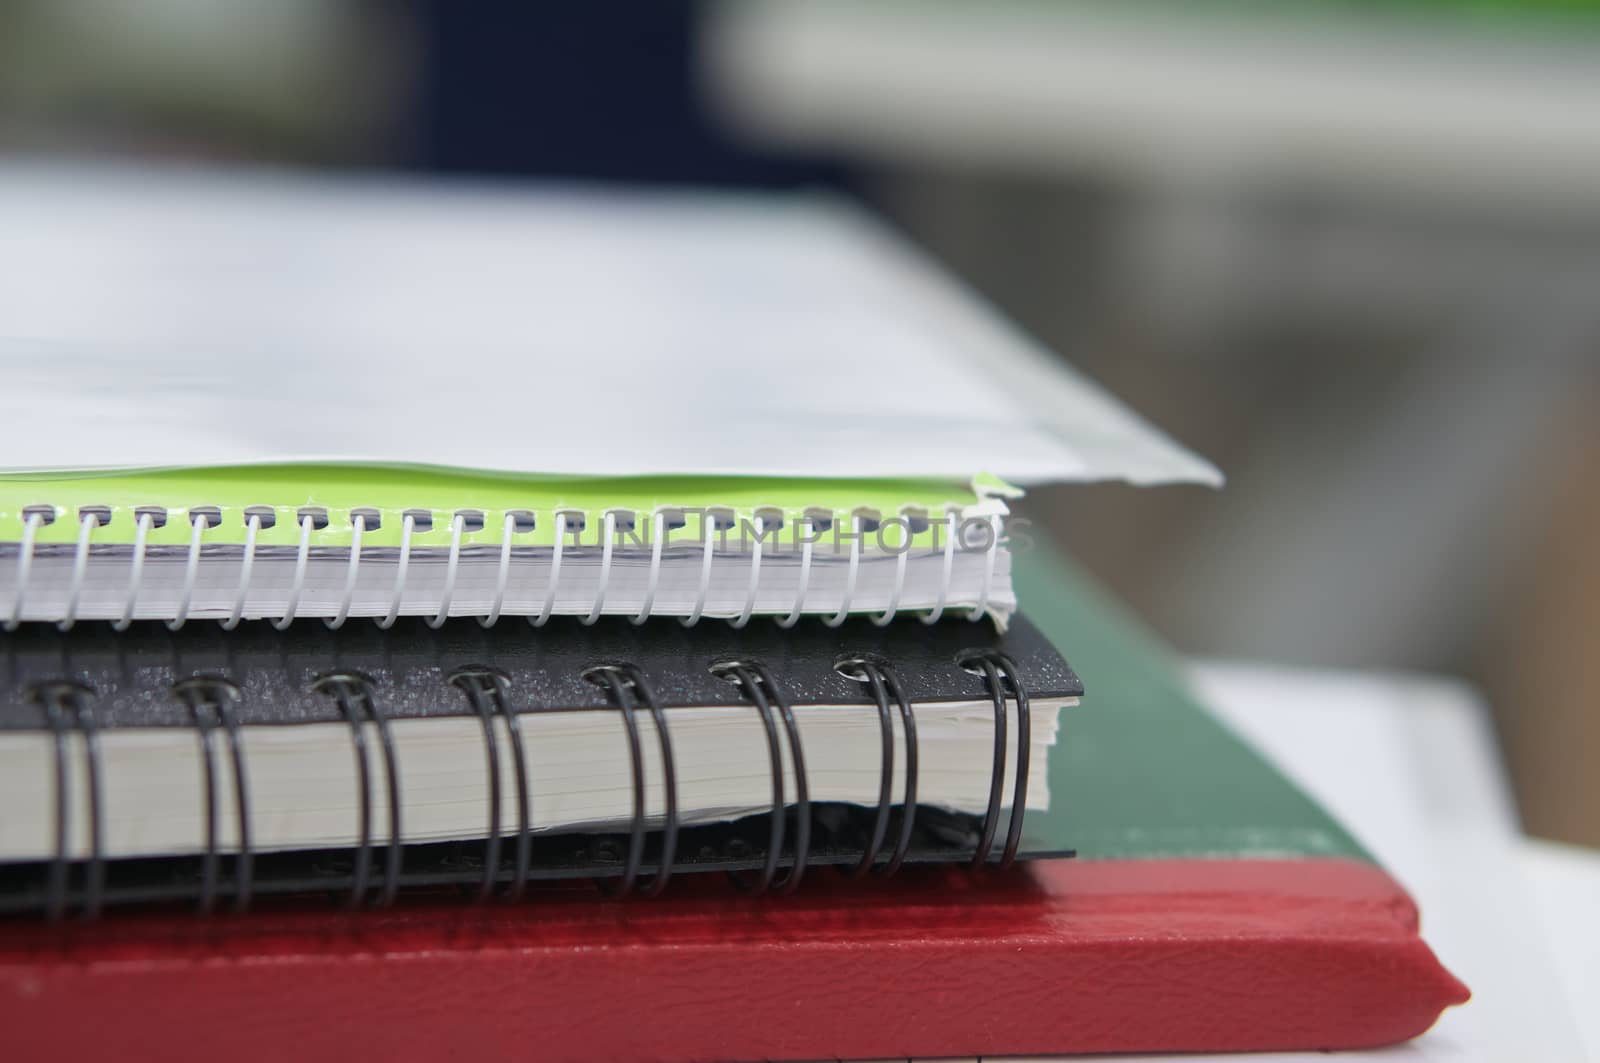 Stack of notebook and file document on white desk at office.